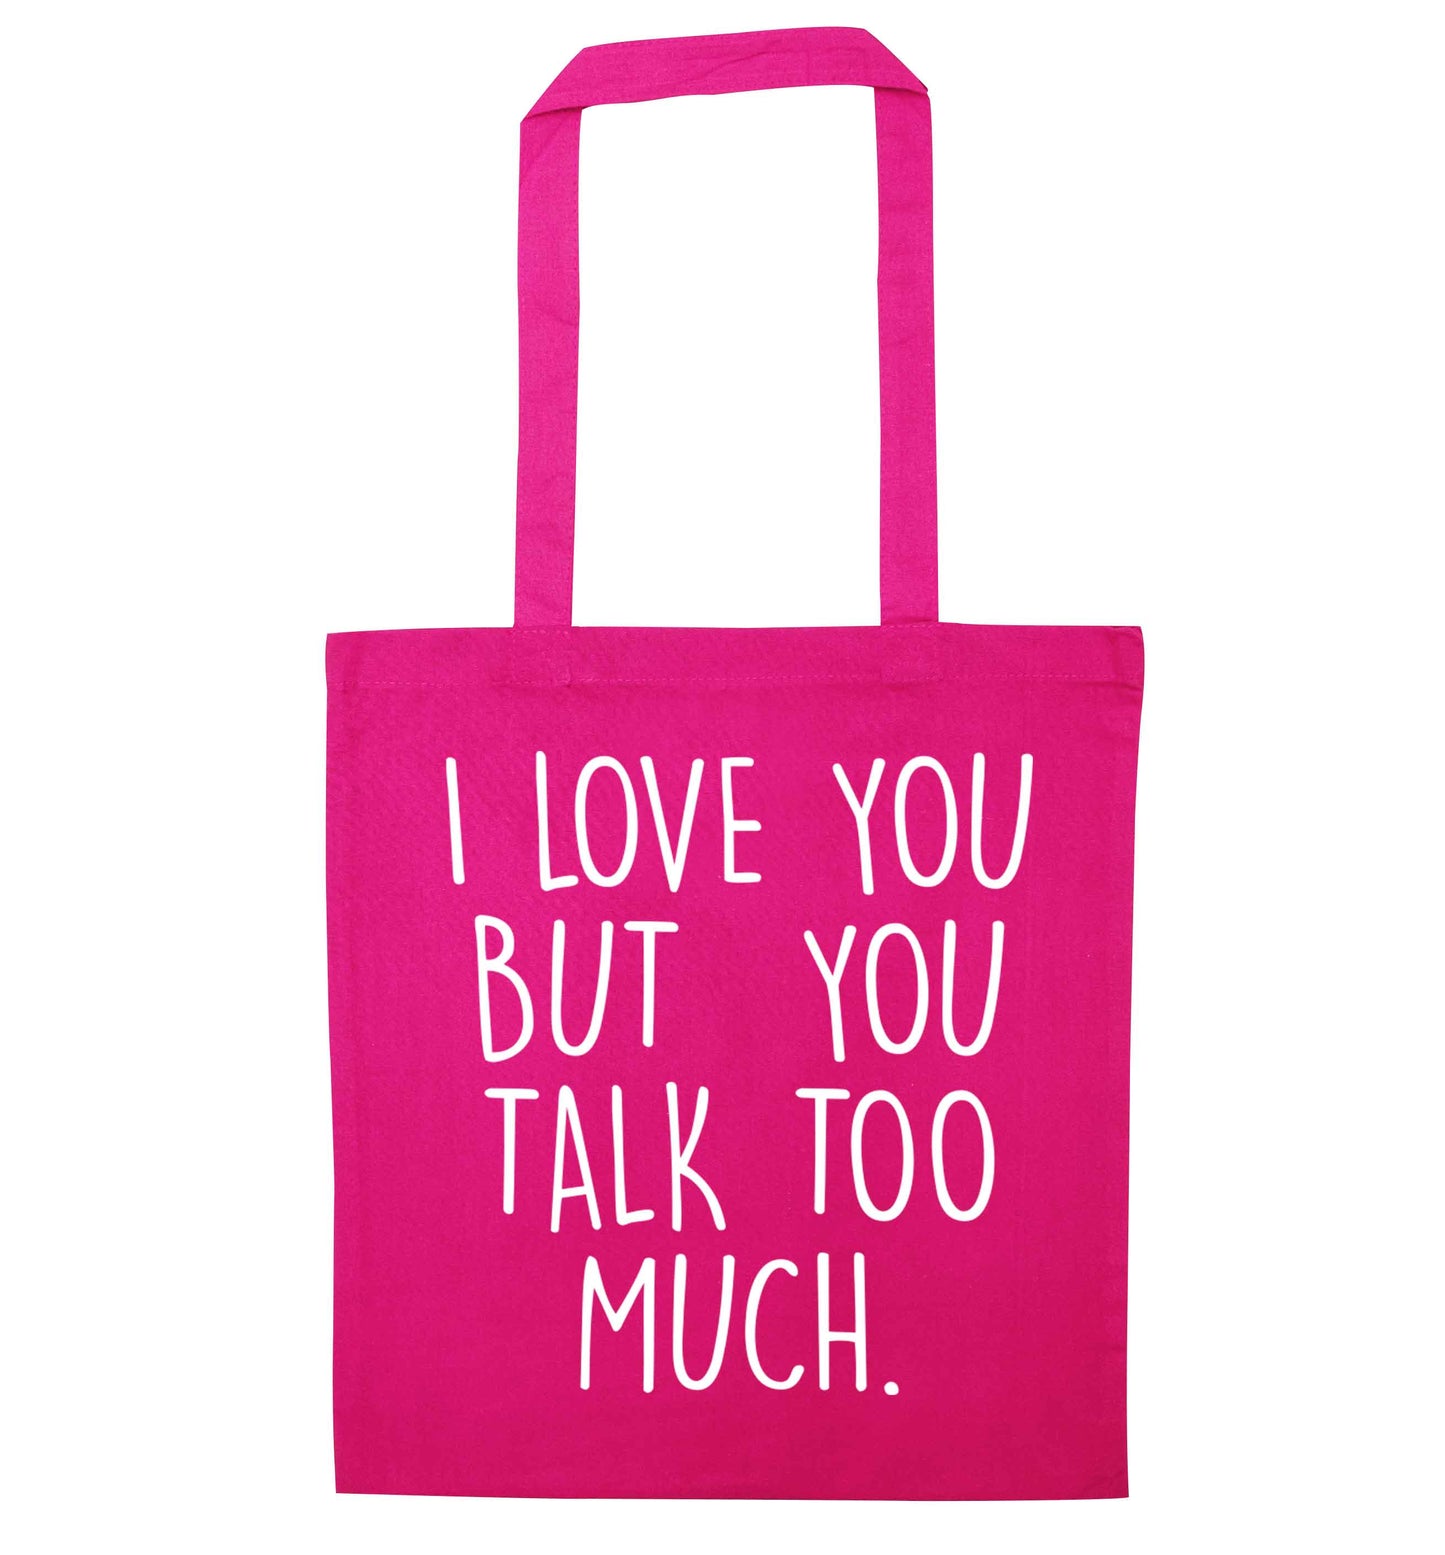 I love you but you talk too much pink tote bag